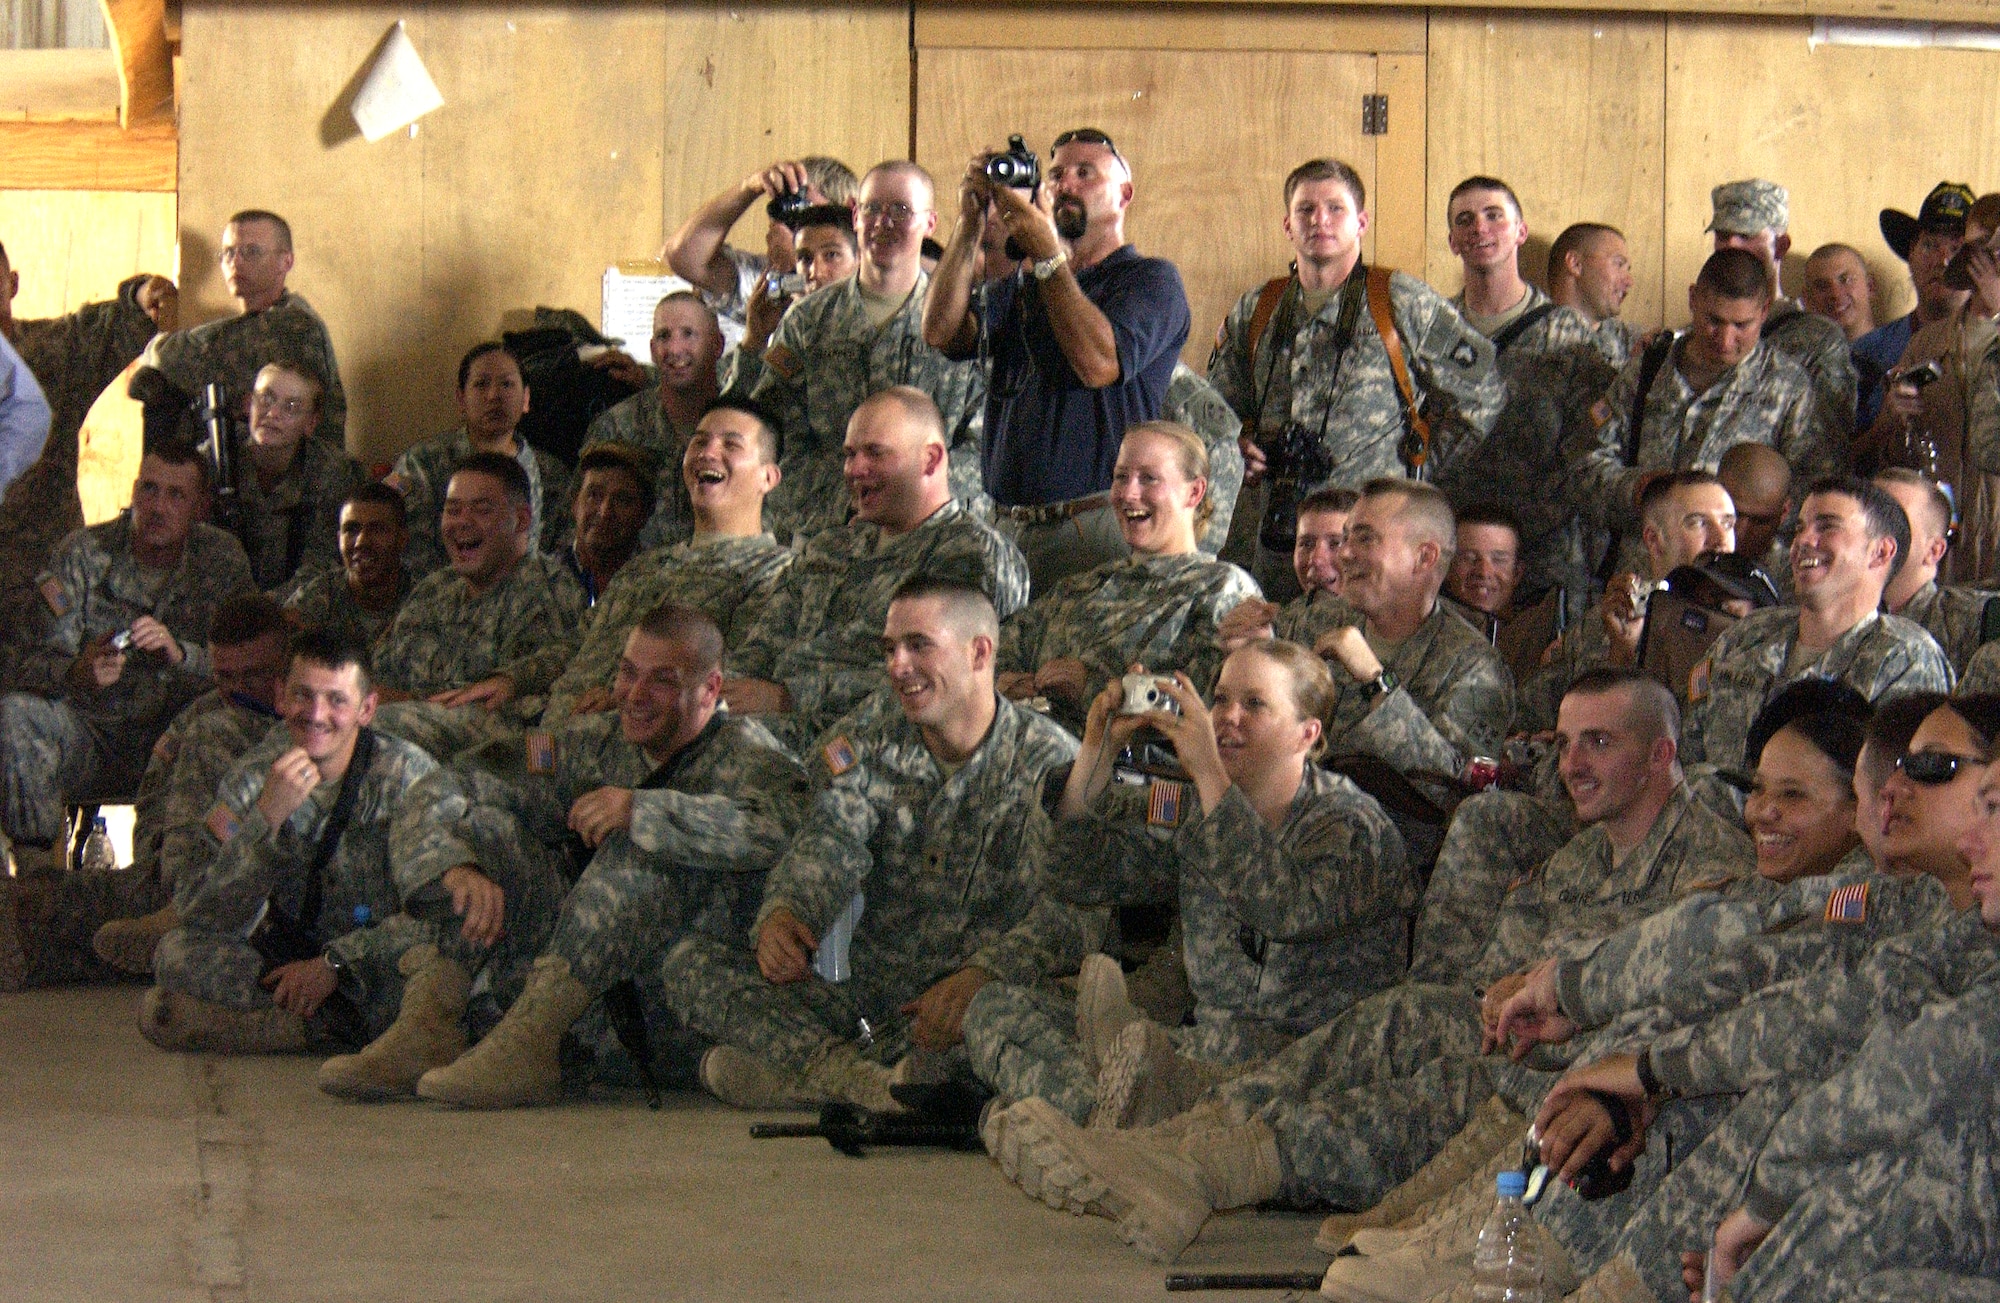 Servicemembers enjoy country music performer Toby Keith during his visit to Forward Operating Base Warhorse, Iraq, on Saturday, May 27, 2006. The base in the Diyala Province was the first stop on Mr. Keith's USO tour. (U.S. Air Force photo/Tech. Sgt. Ken Bergmann)
